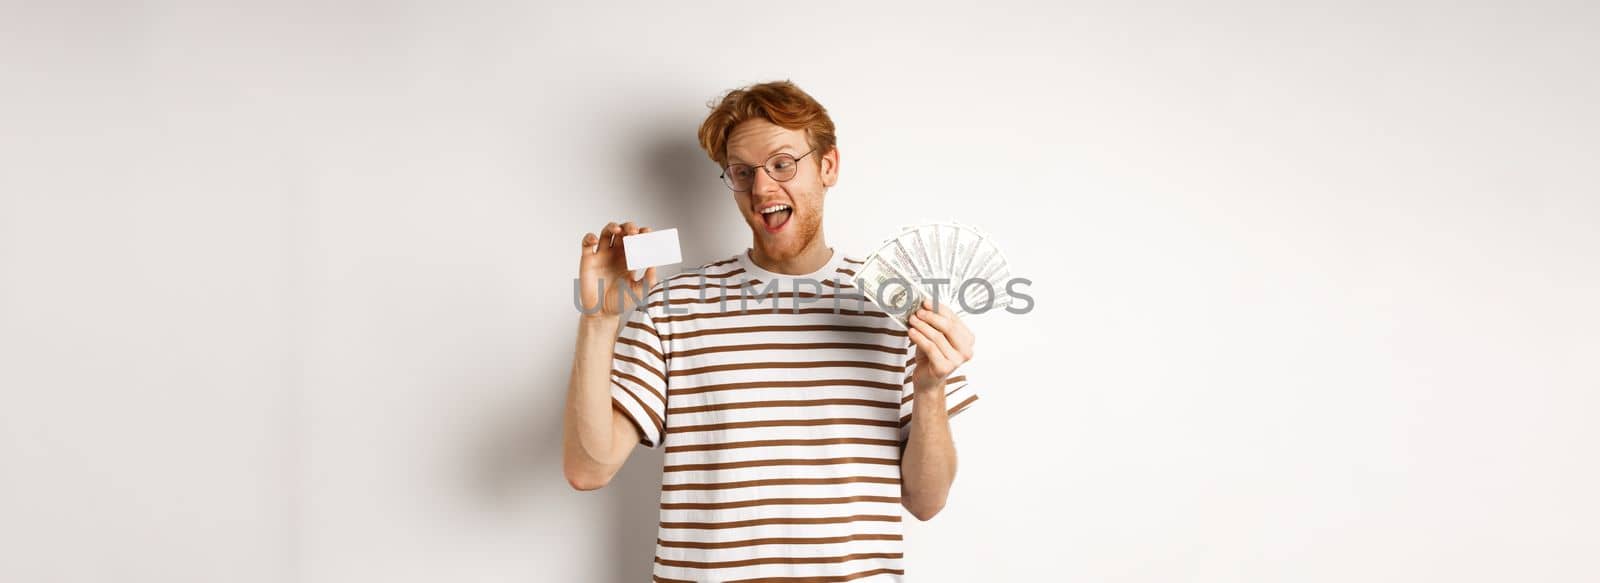 Shopping and finance concept. Young redhead man in glasses choosing plastic credit card, showing dollars and smiling, standing over white background.